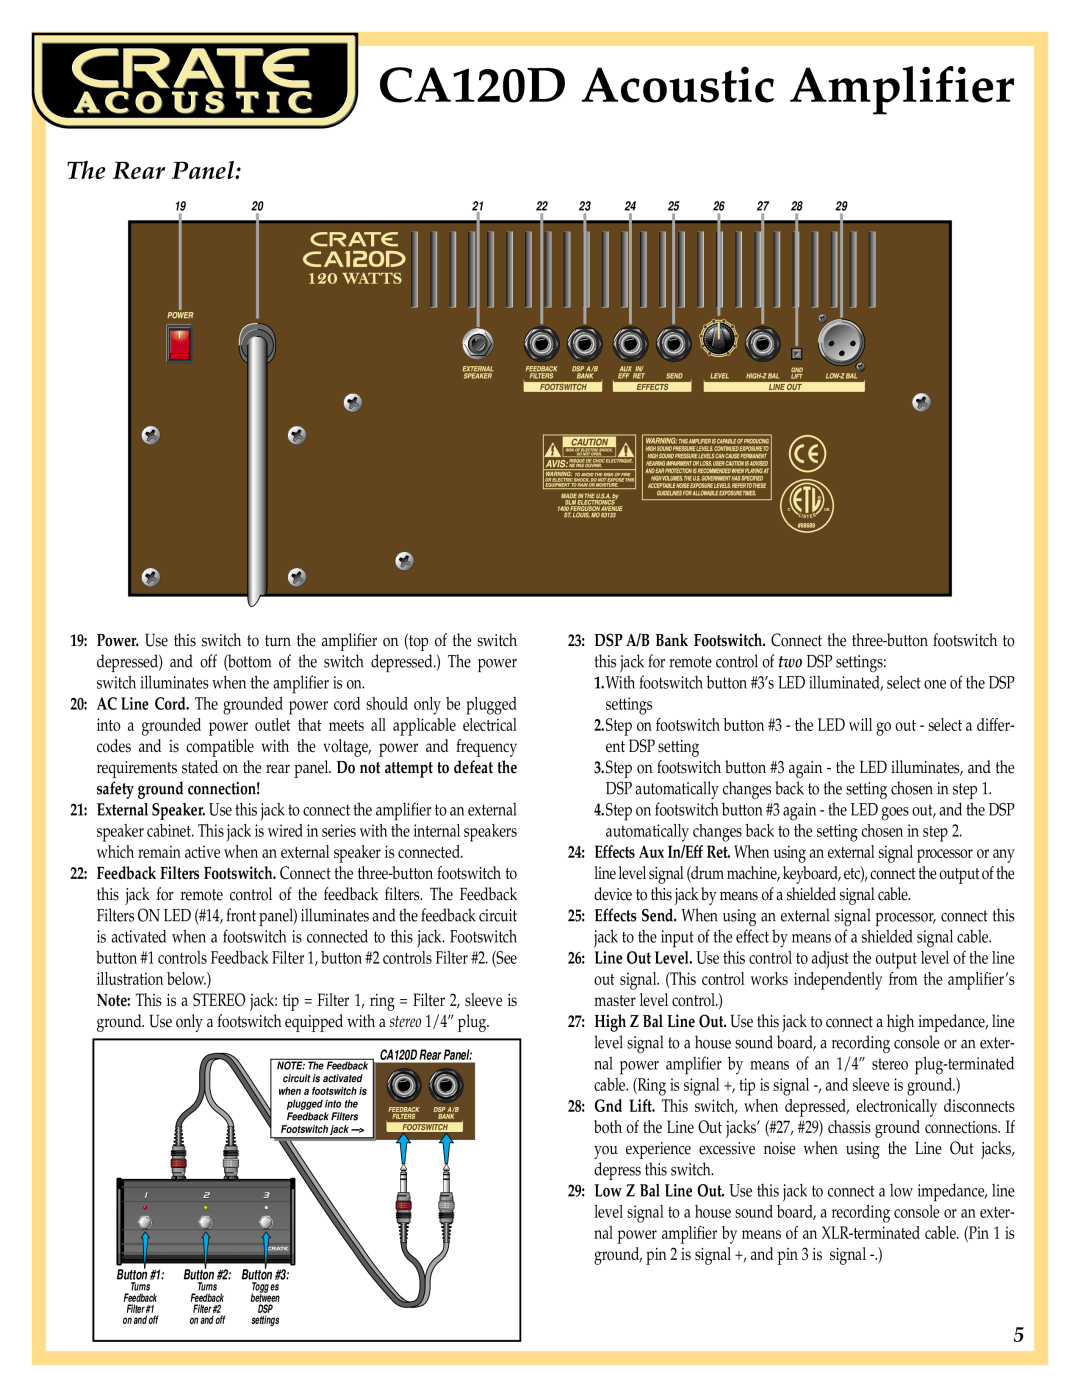 Crate Amplifiers manual The Rear Panel, CA120D Acoustic Amplifier 